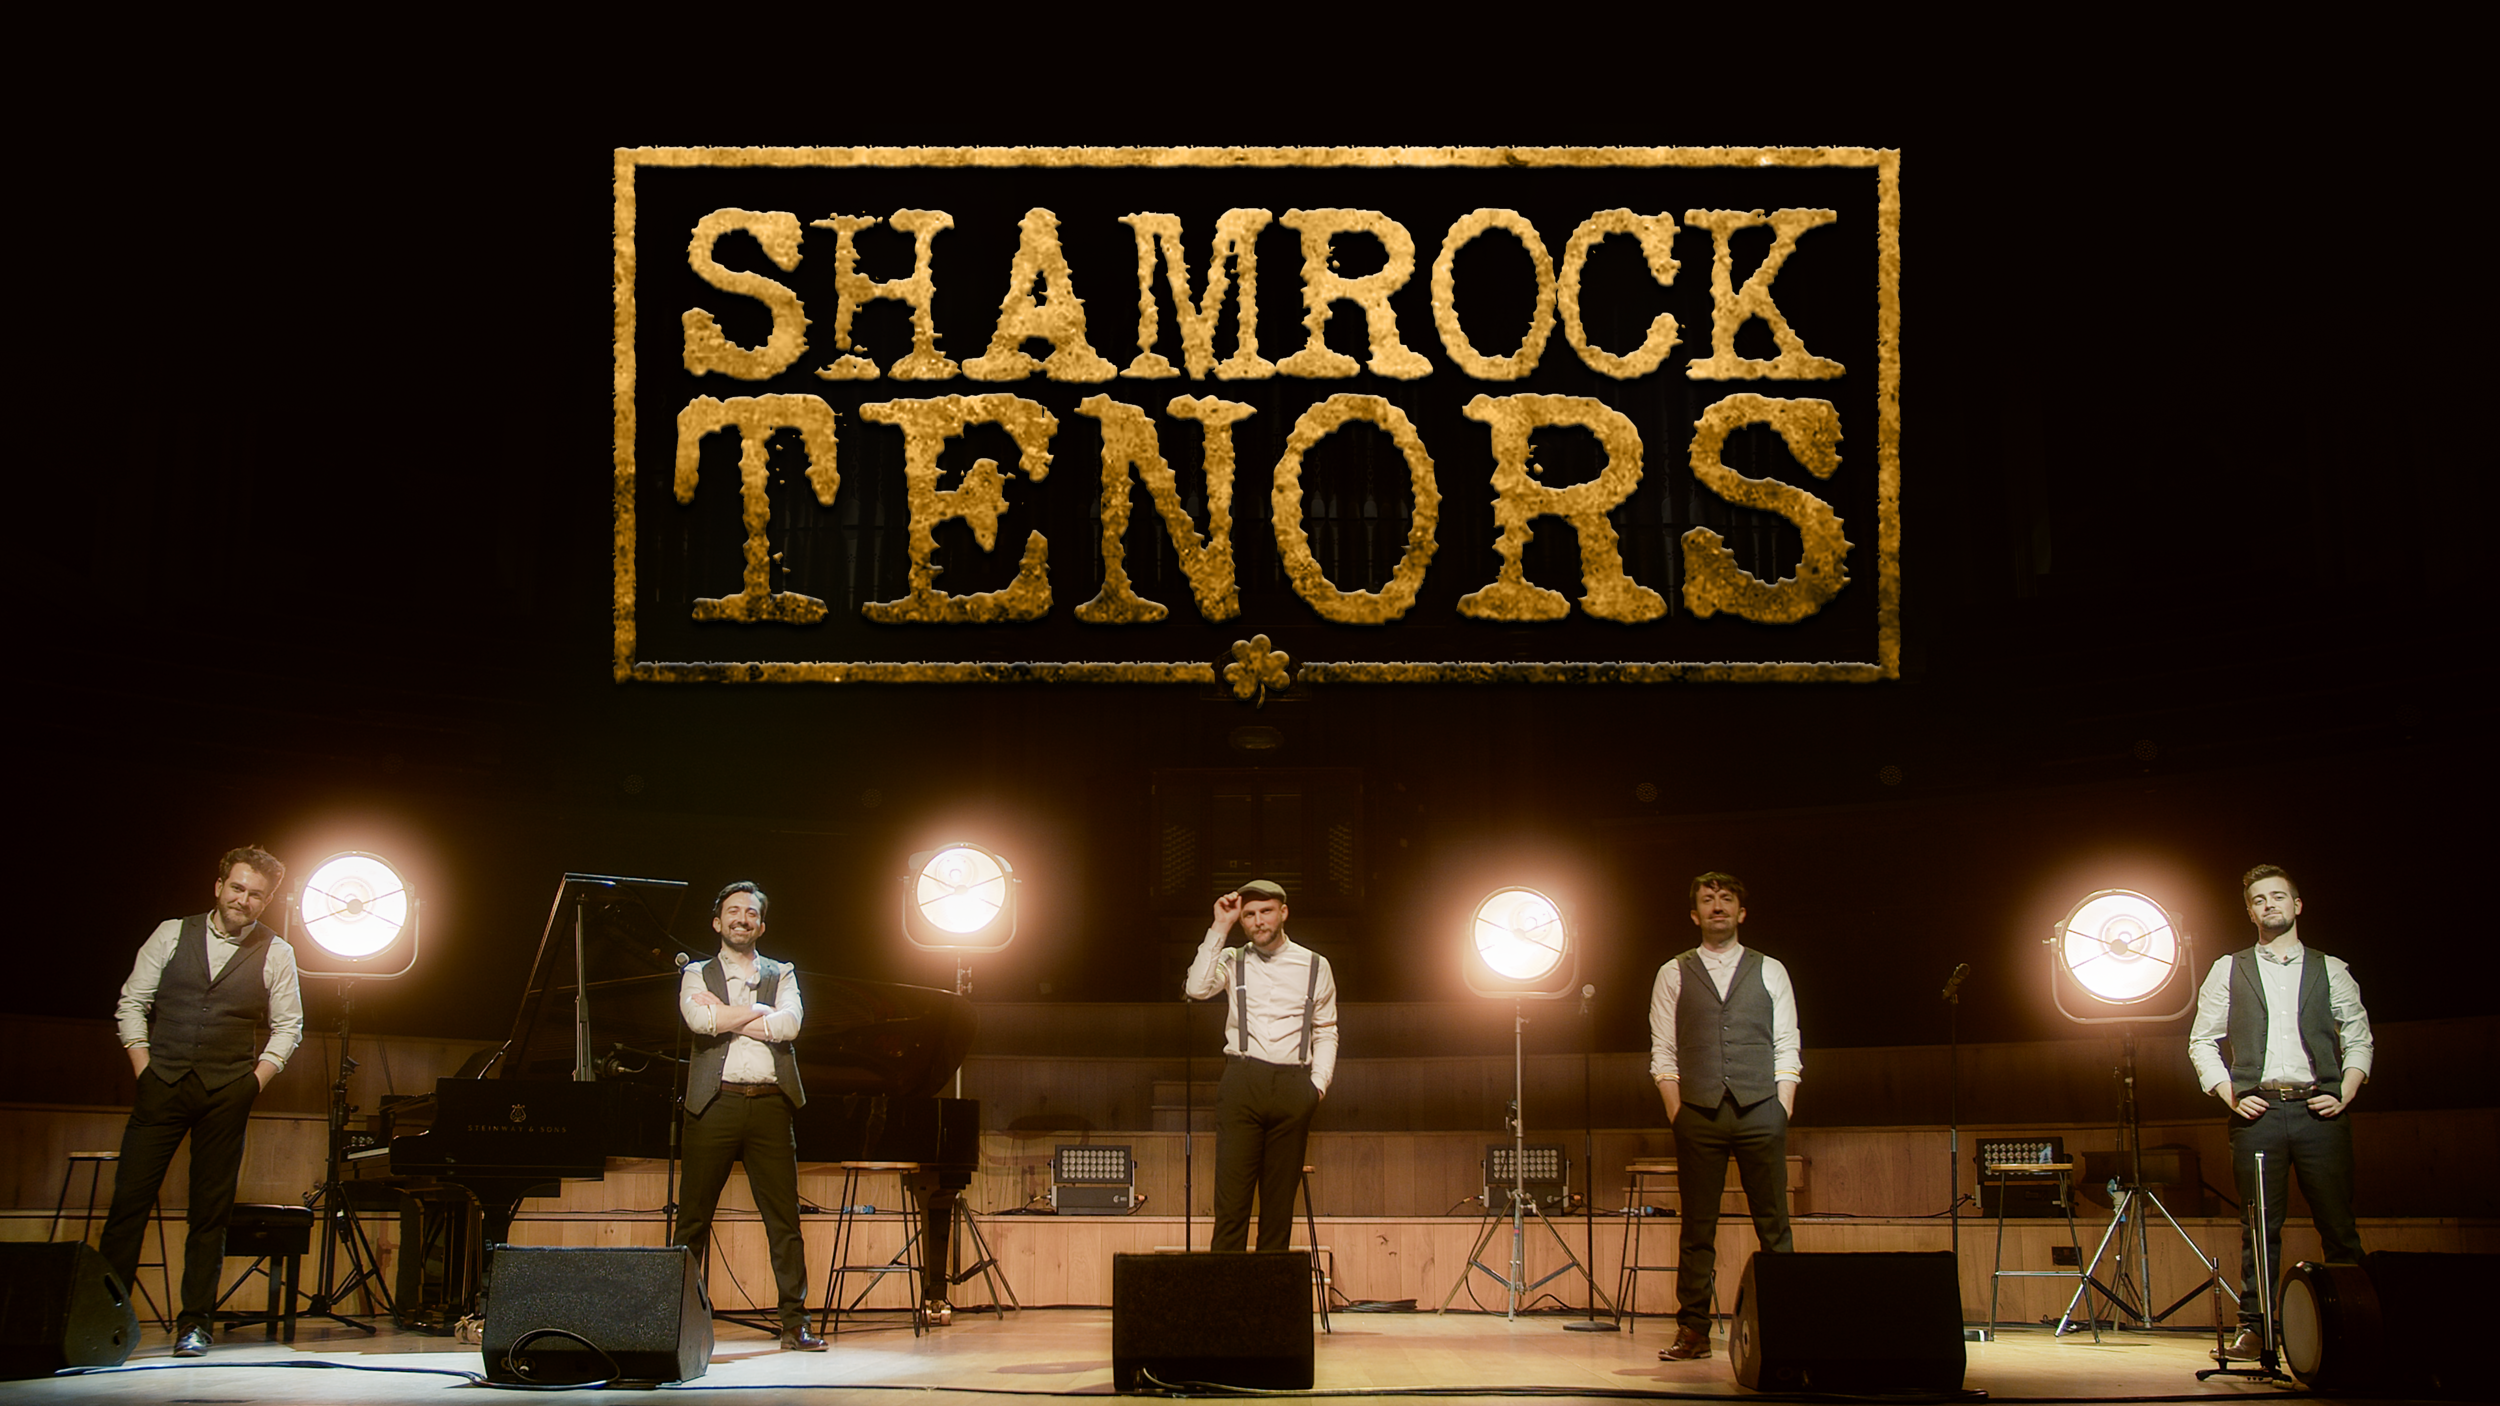 The Shamrock Tenors live on stage